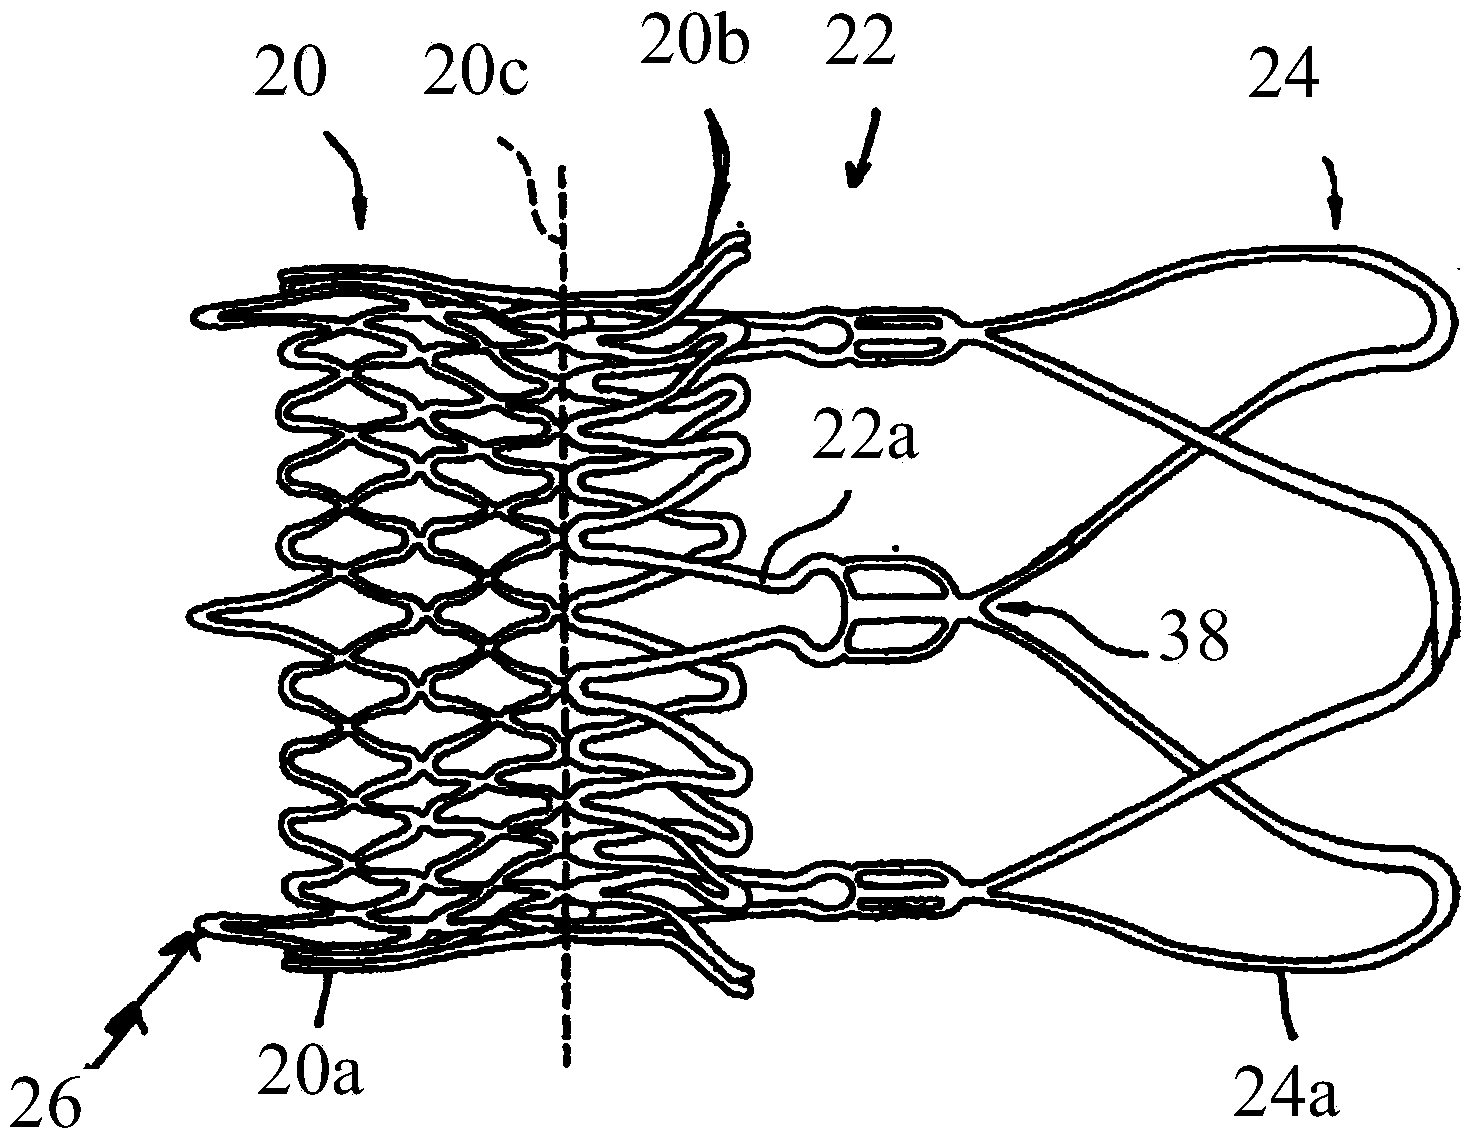 Method and apparatus for compressing/loading stent-valves